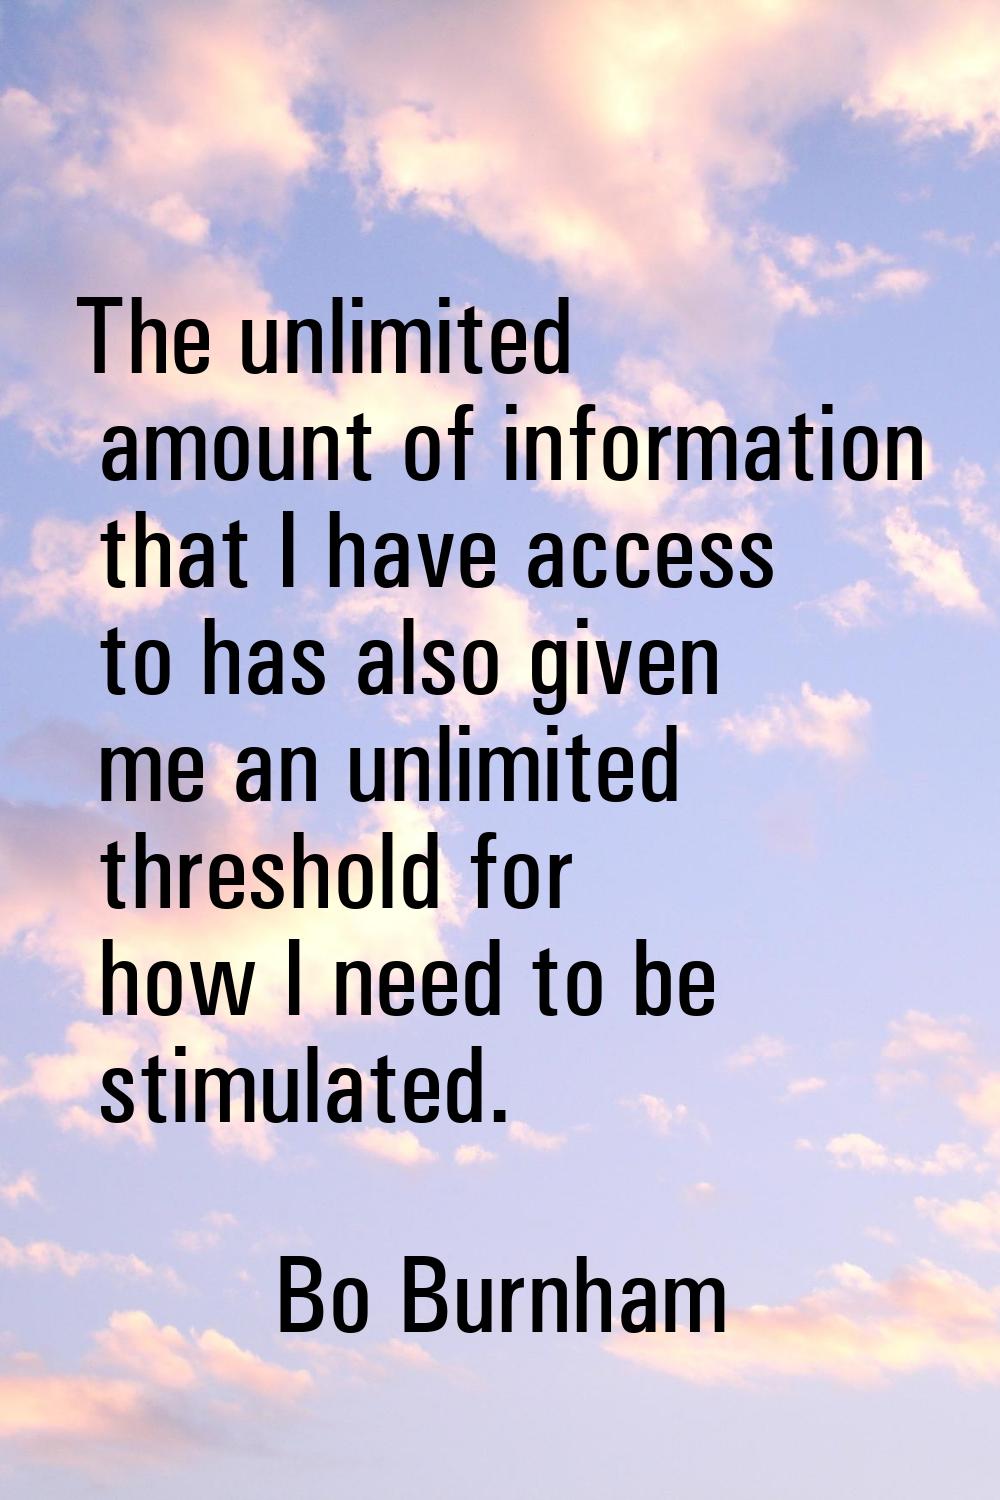 The unlimited amount of information that I have access to has also given me an unlimited threshold 